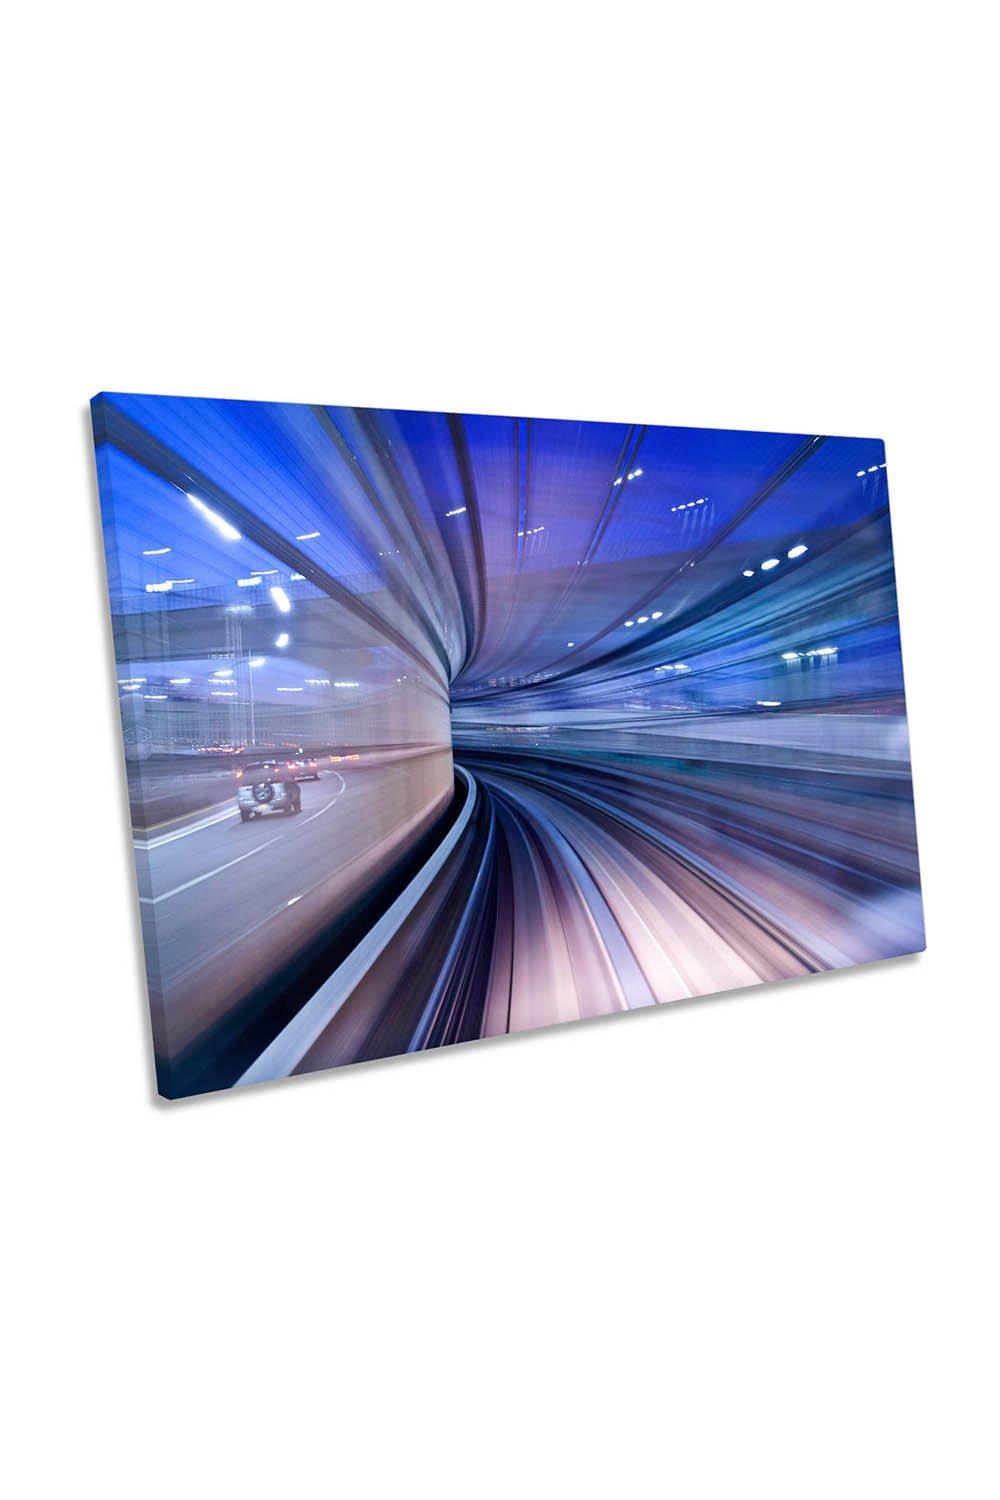 Twilight Traffic Tunnel Blue Canvas Wall Art Picture Print